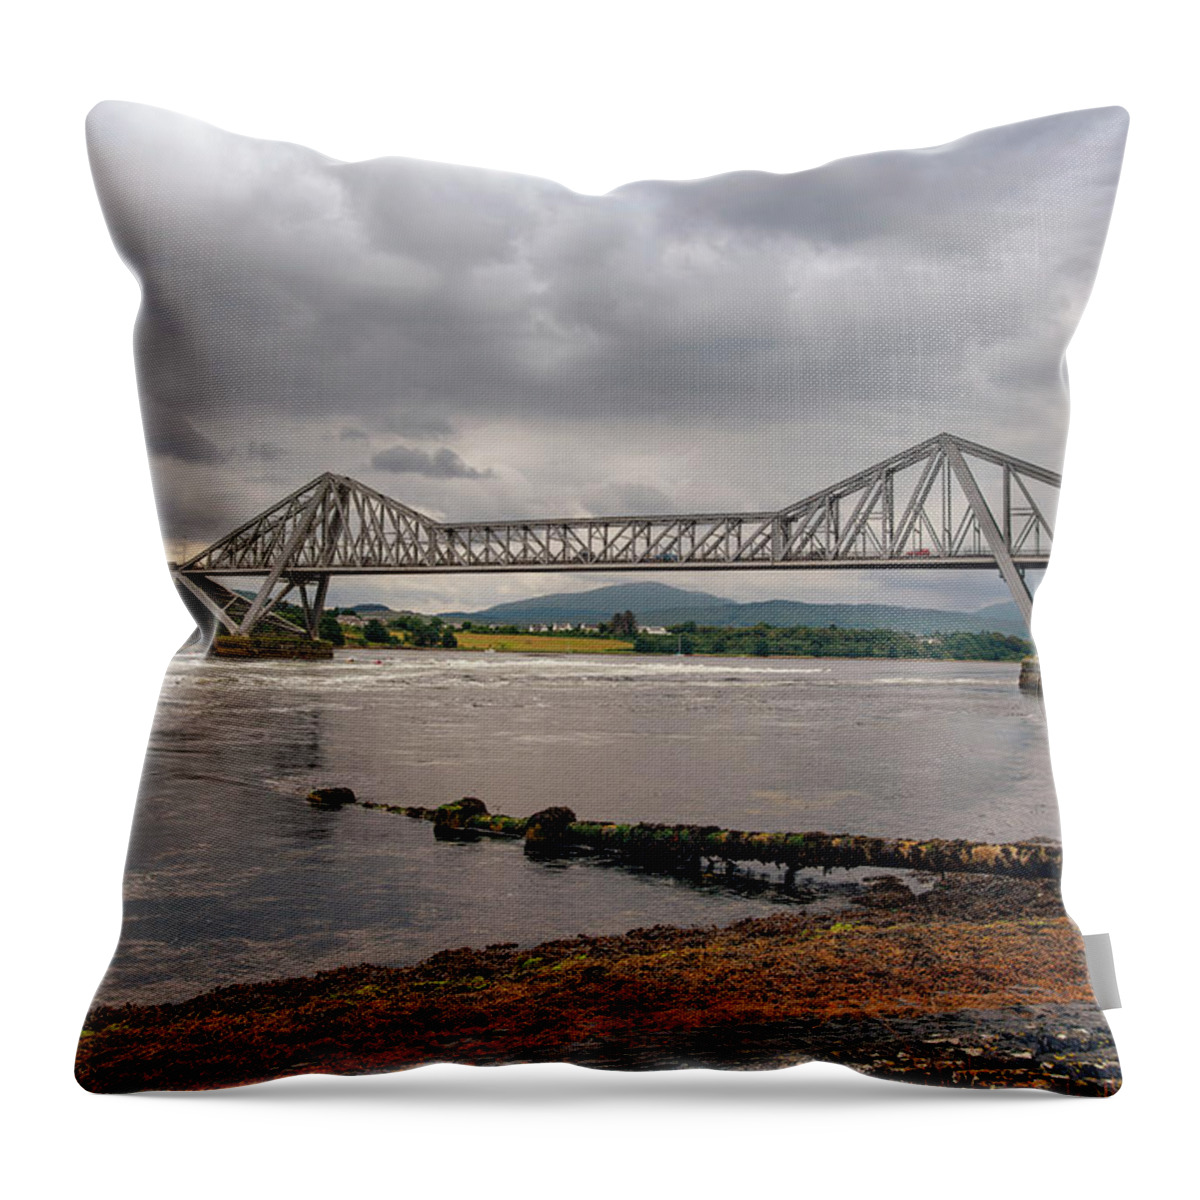 Connel Bridge Throw Pillow featuring the photograph Connel Bridge by Ray Devlin